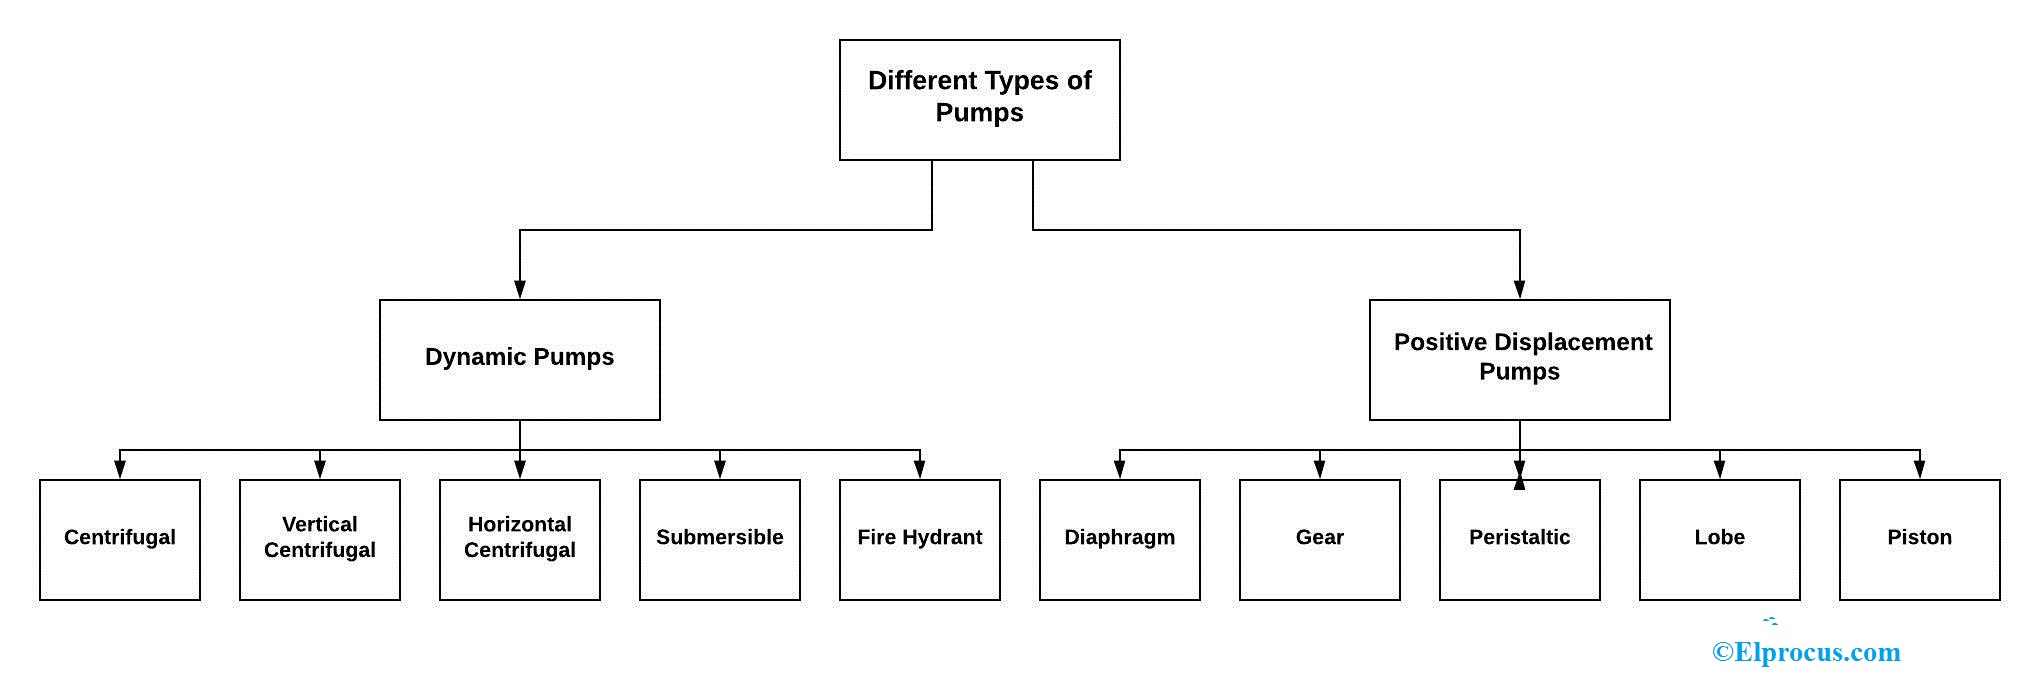 Different Types of Pumps: Working 